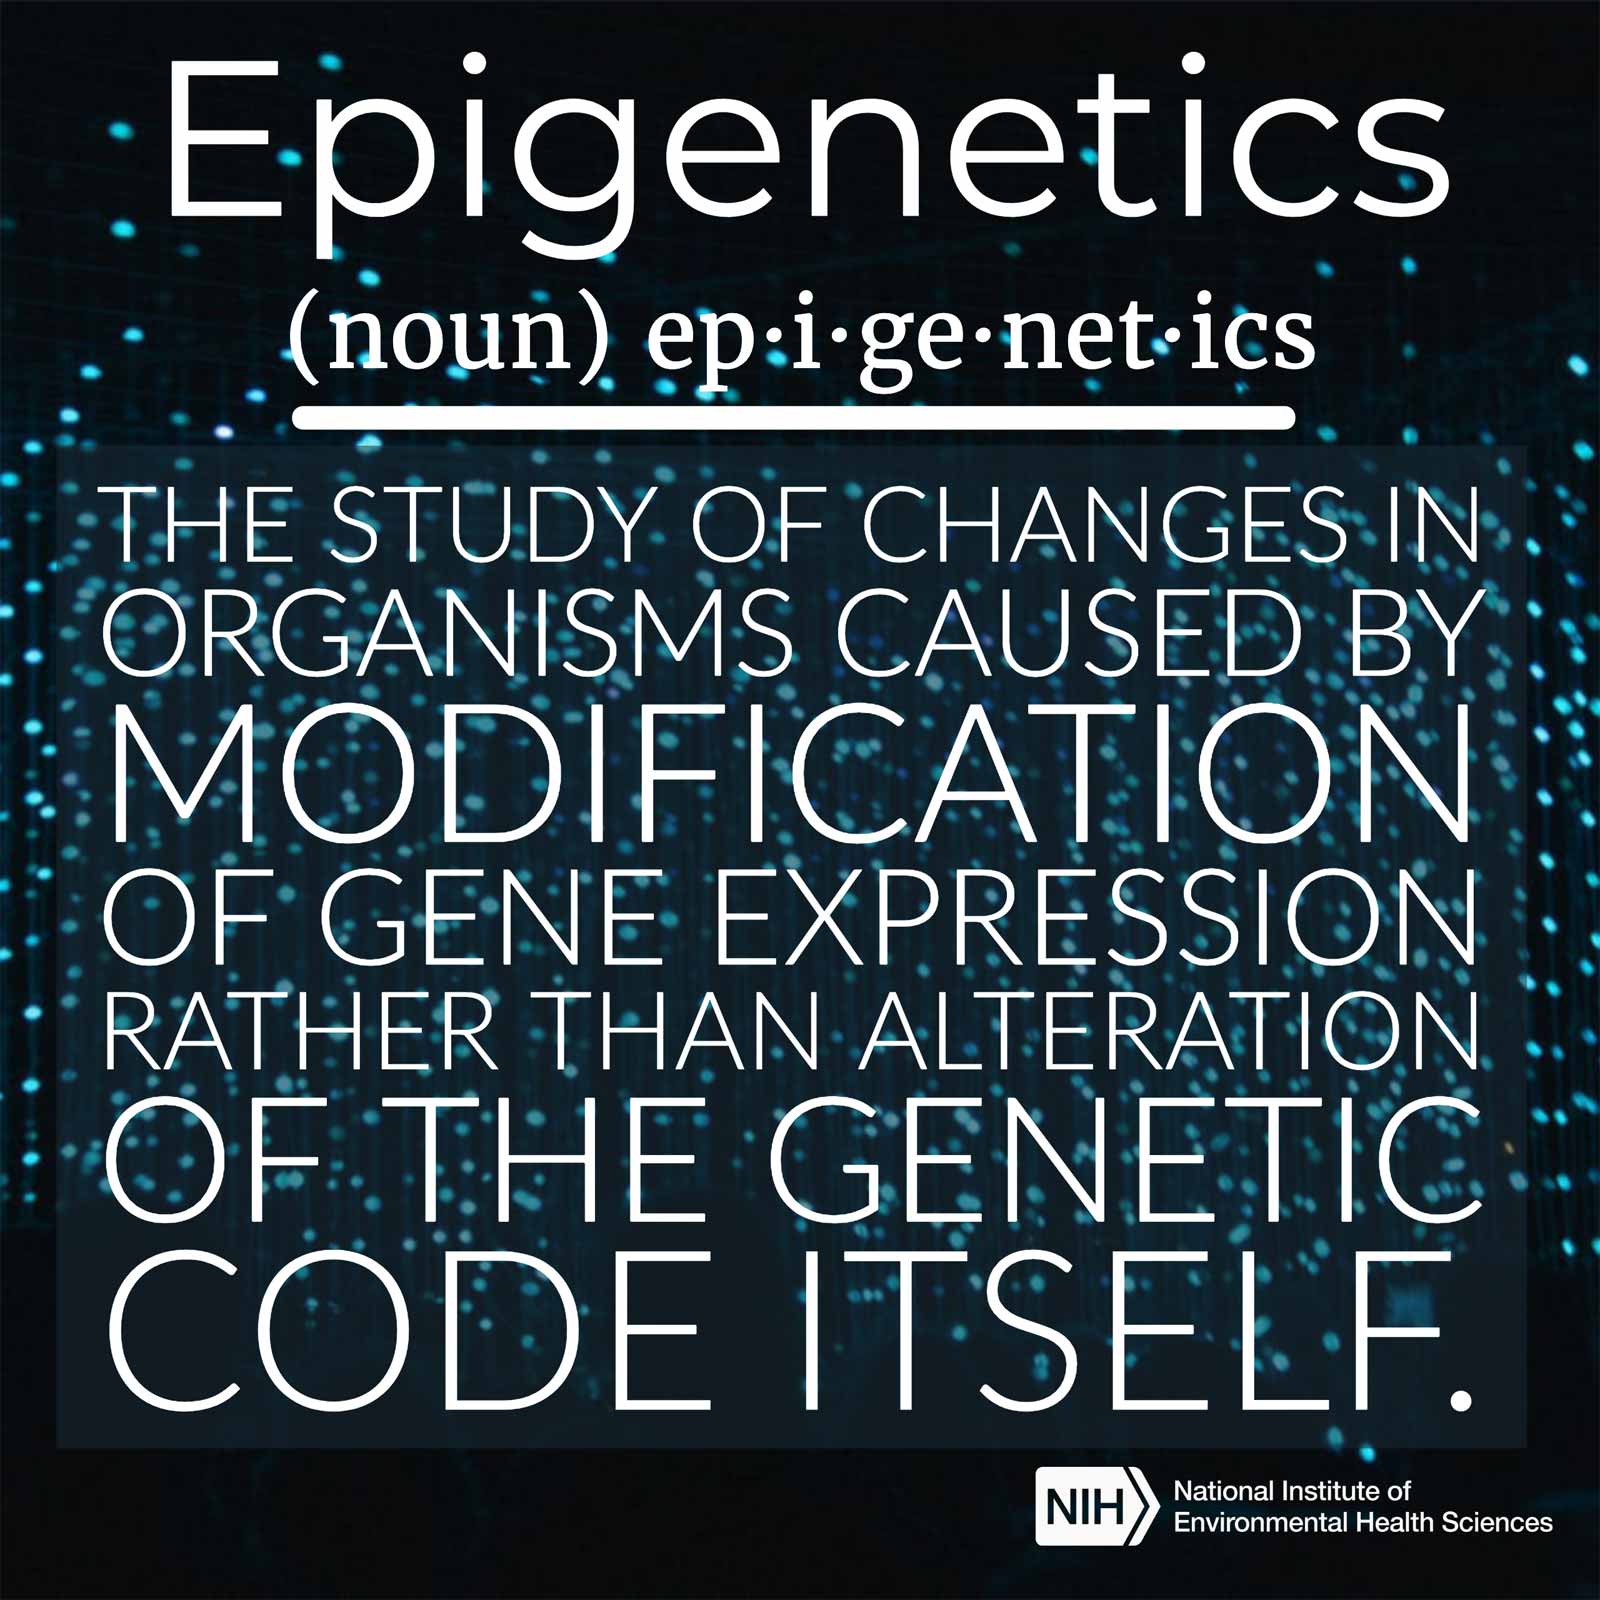 Epigenetics (noun) defined as &#39;the study of changes in organisms caused by modification of gene expression rather than the alteration of the genetic code itself.&#39;